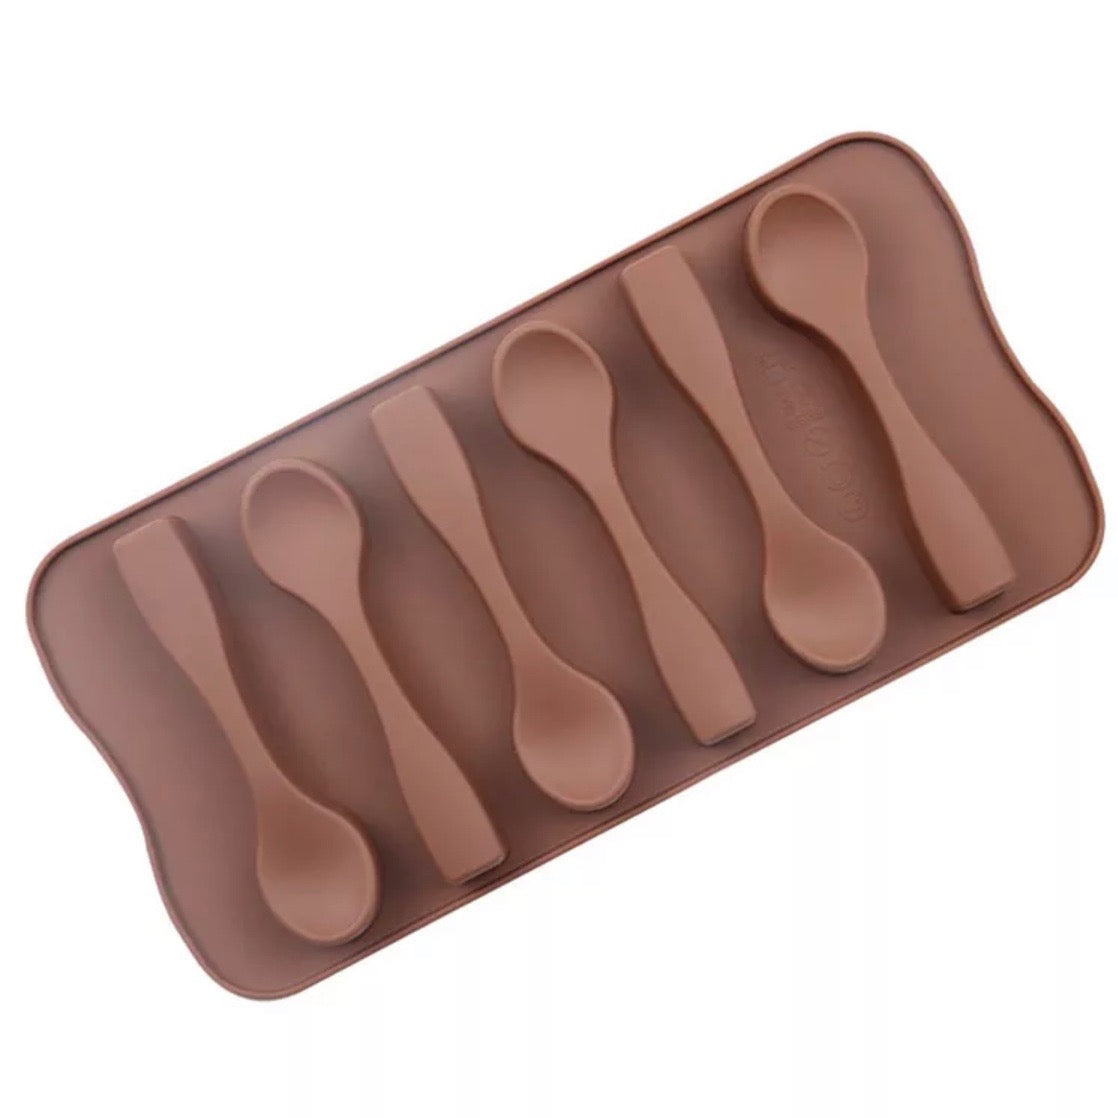 Silicone Spoon Mold – Busy Bakers Supplies